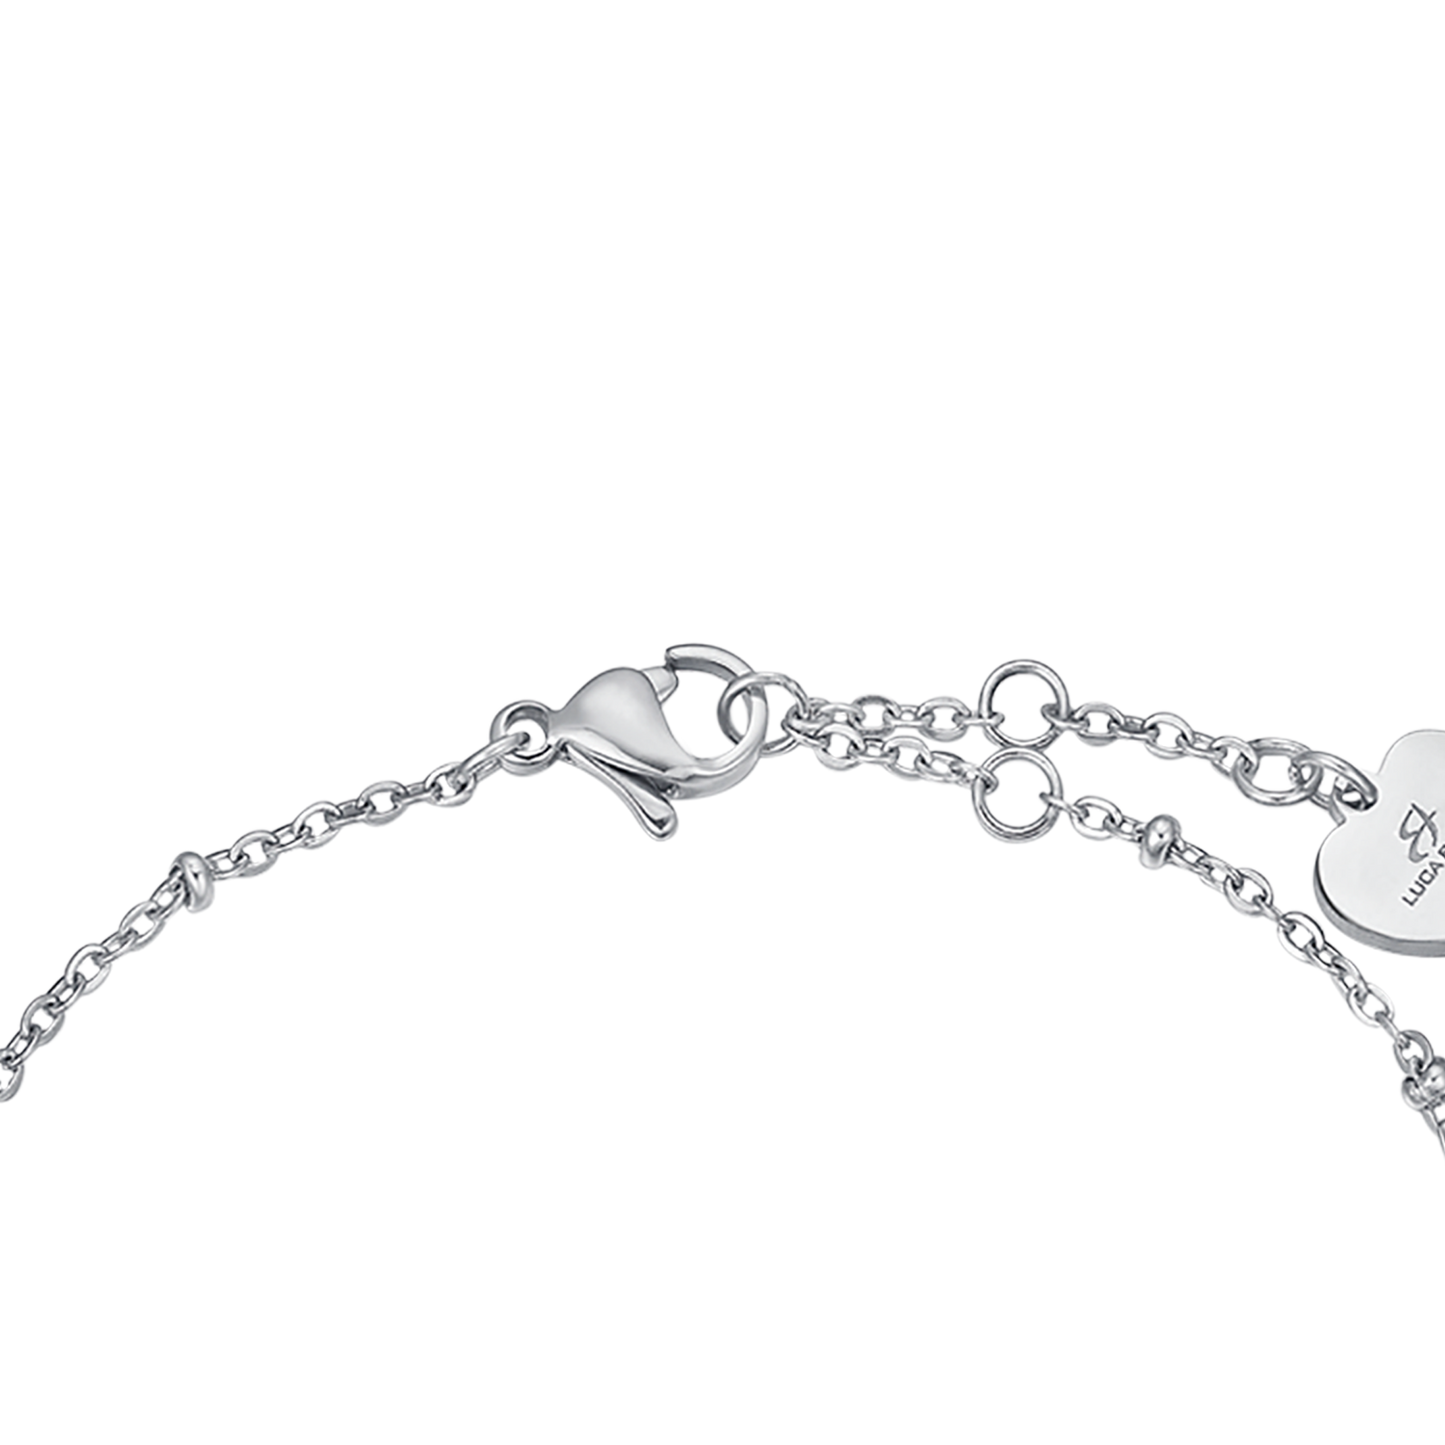 STAINLESS STEEL BRACELET WITH STEEL HEARTS AND STEEL IP ROSE Luca Barra